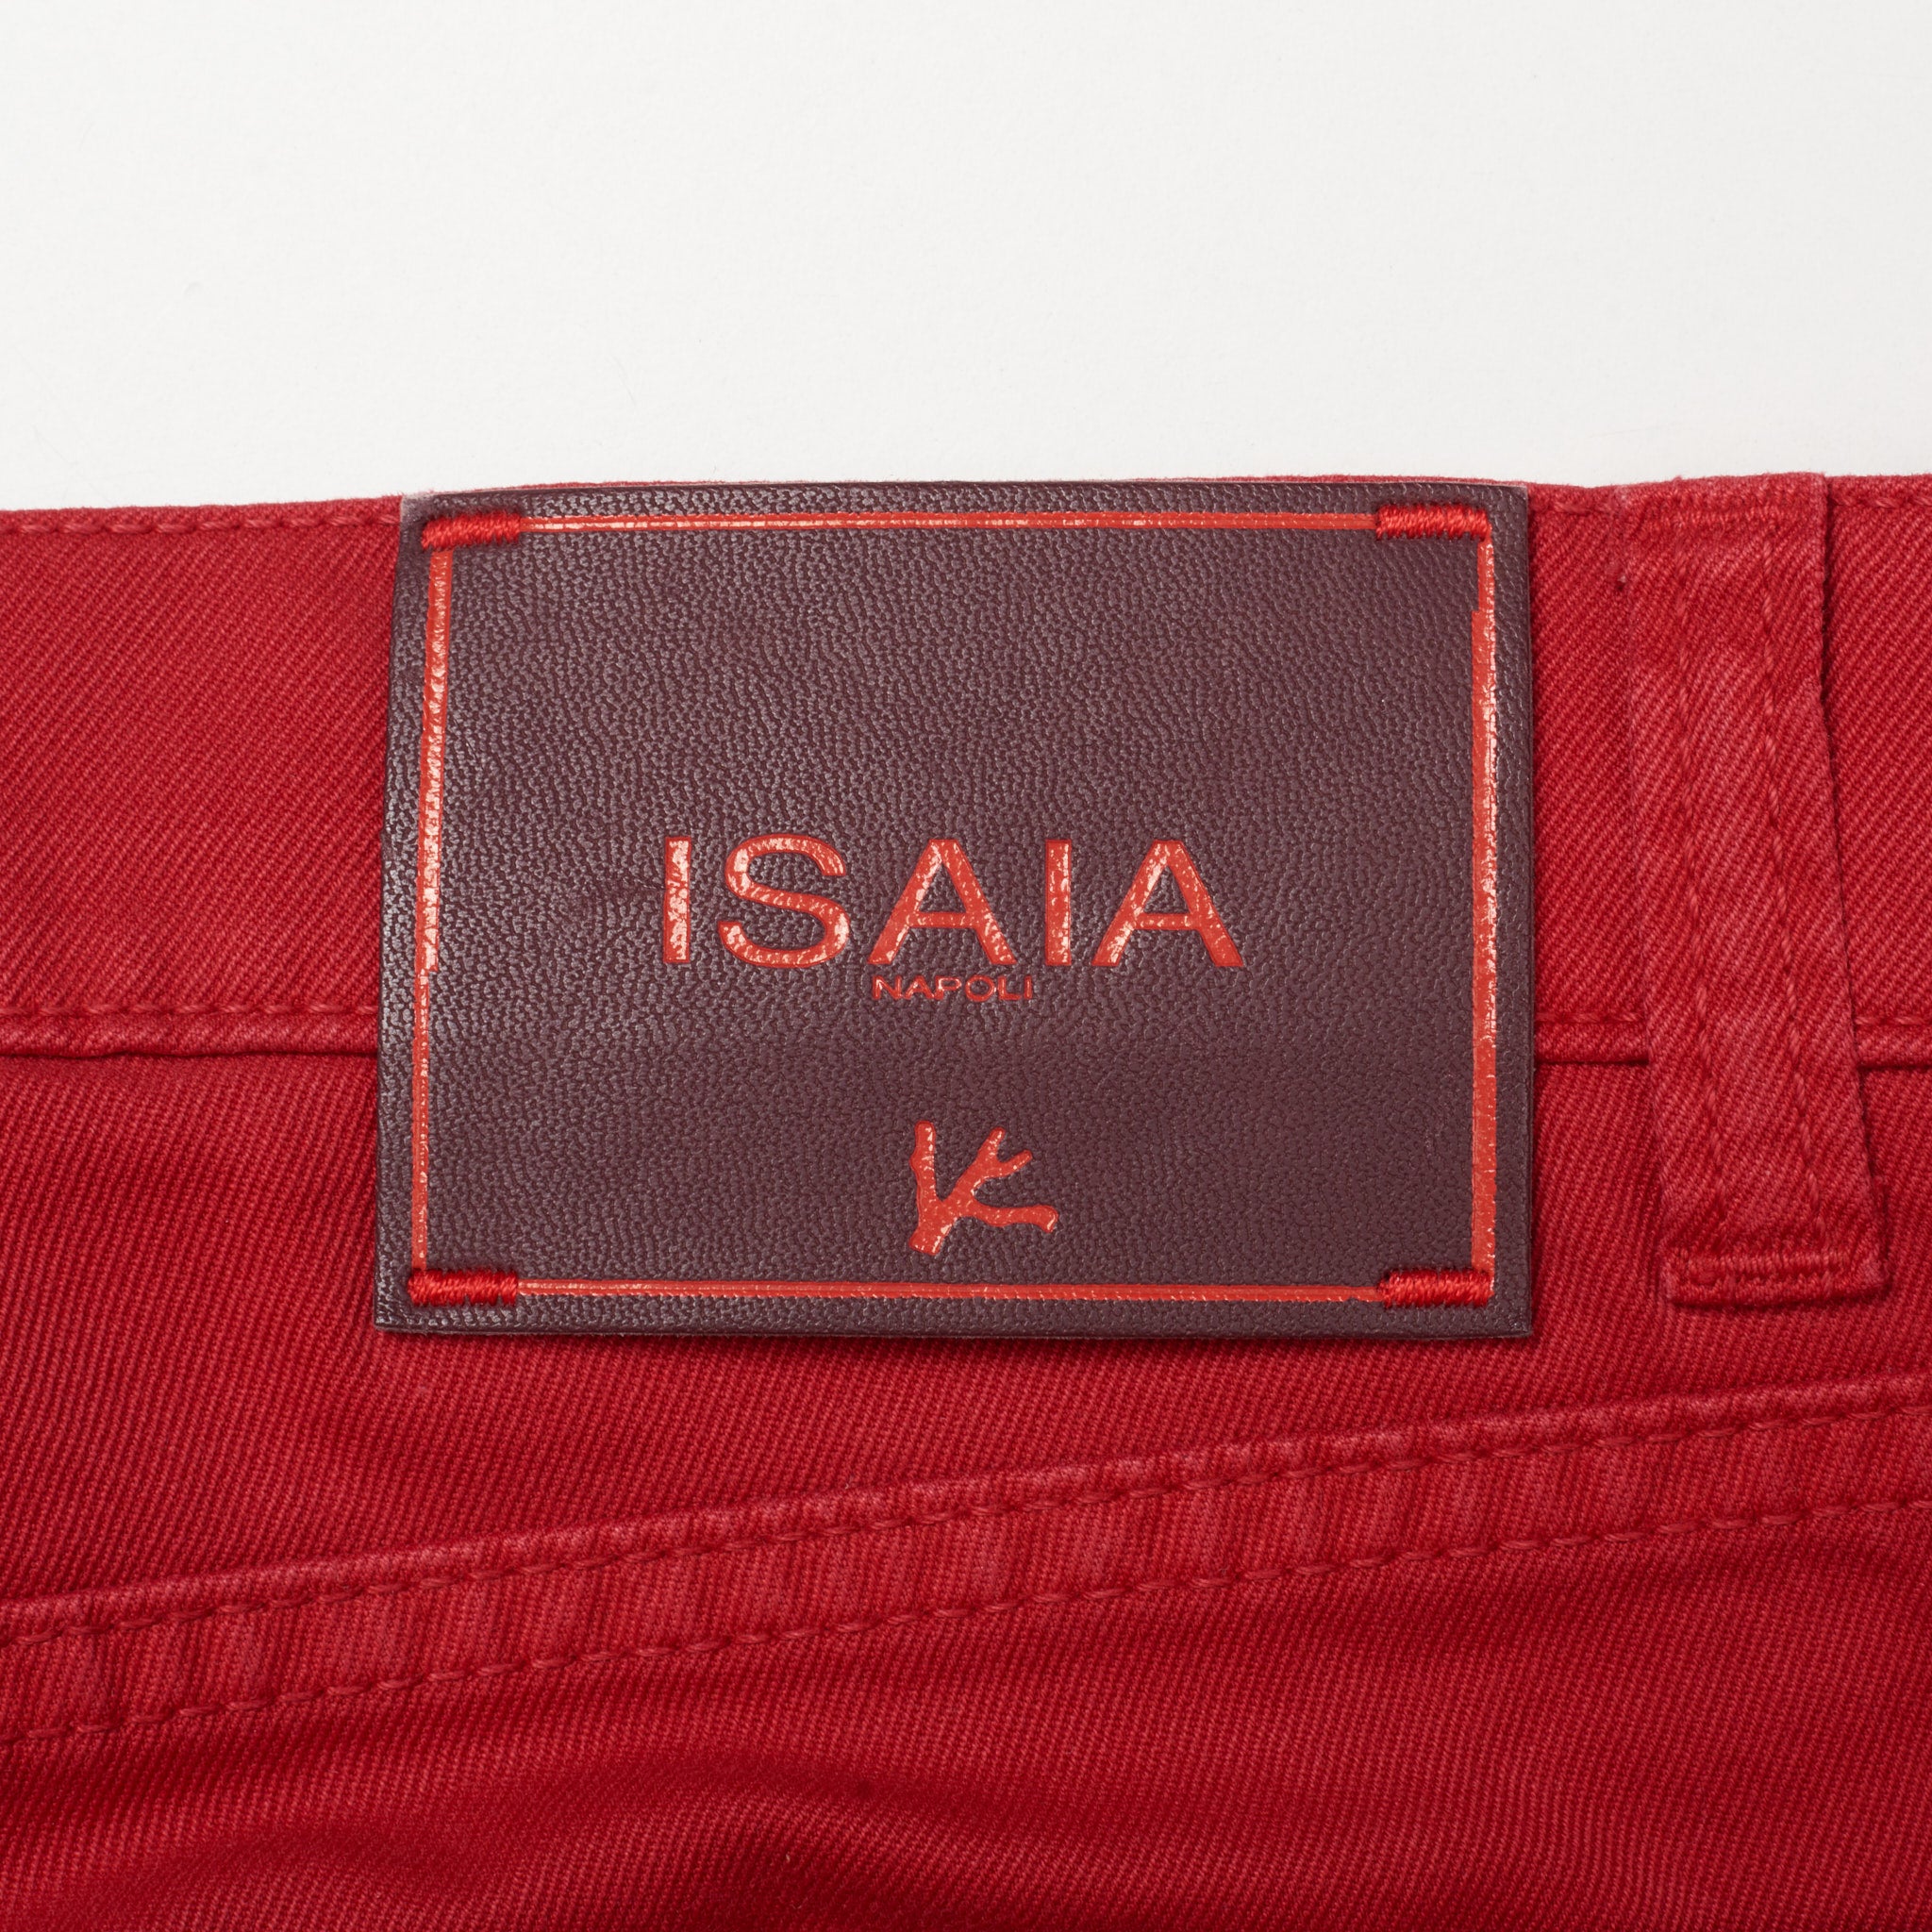 ISAIA Napoli Red Stretch Denim Jeans Pants NEW Slim Straight Fit ISAIA